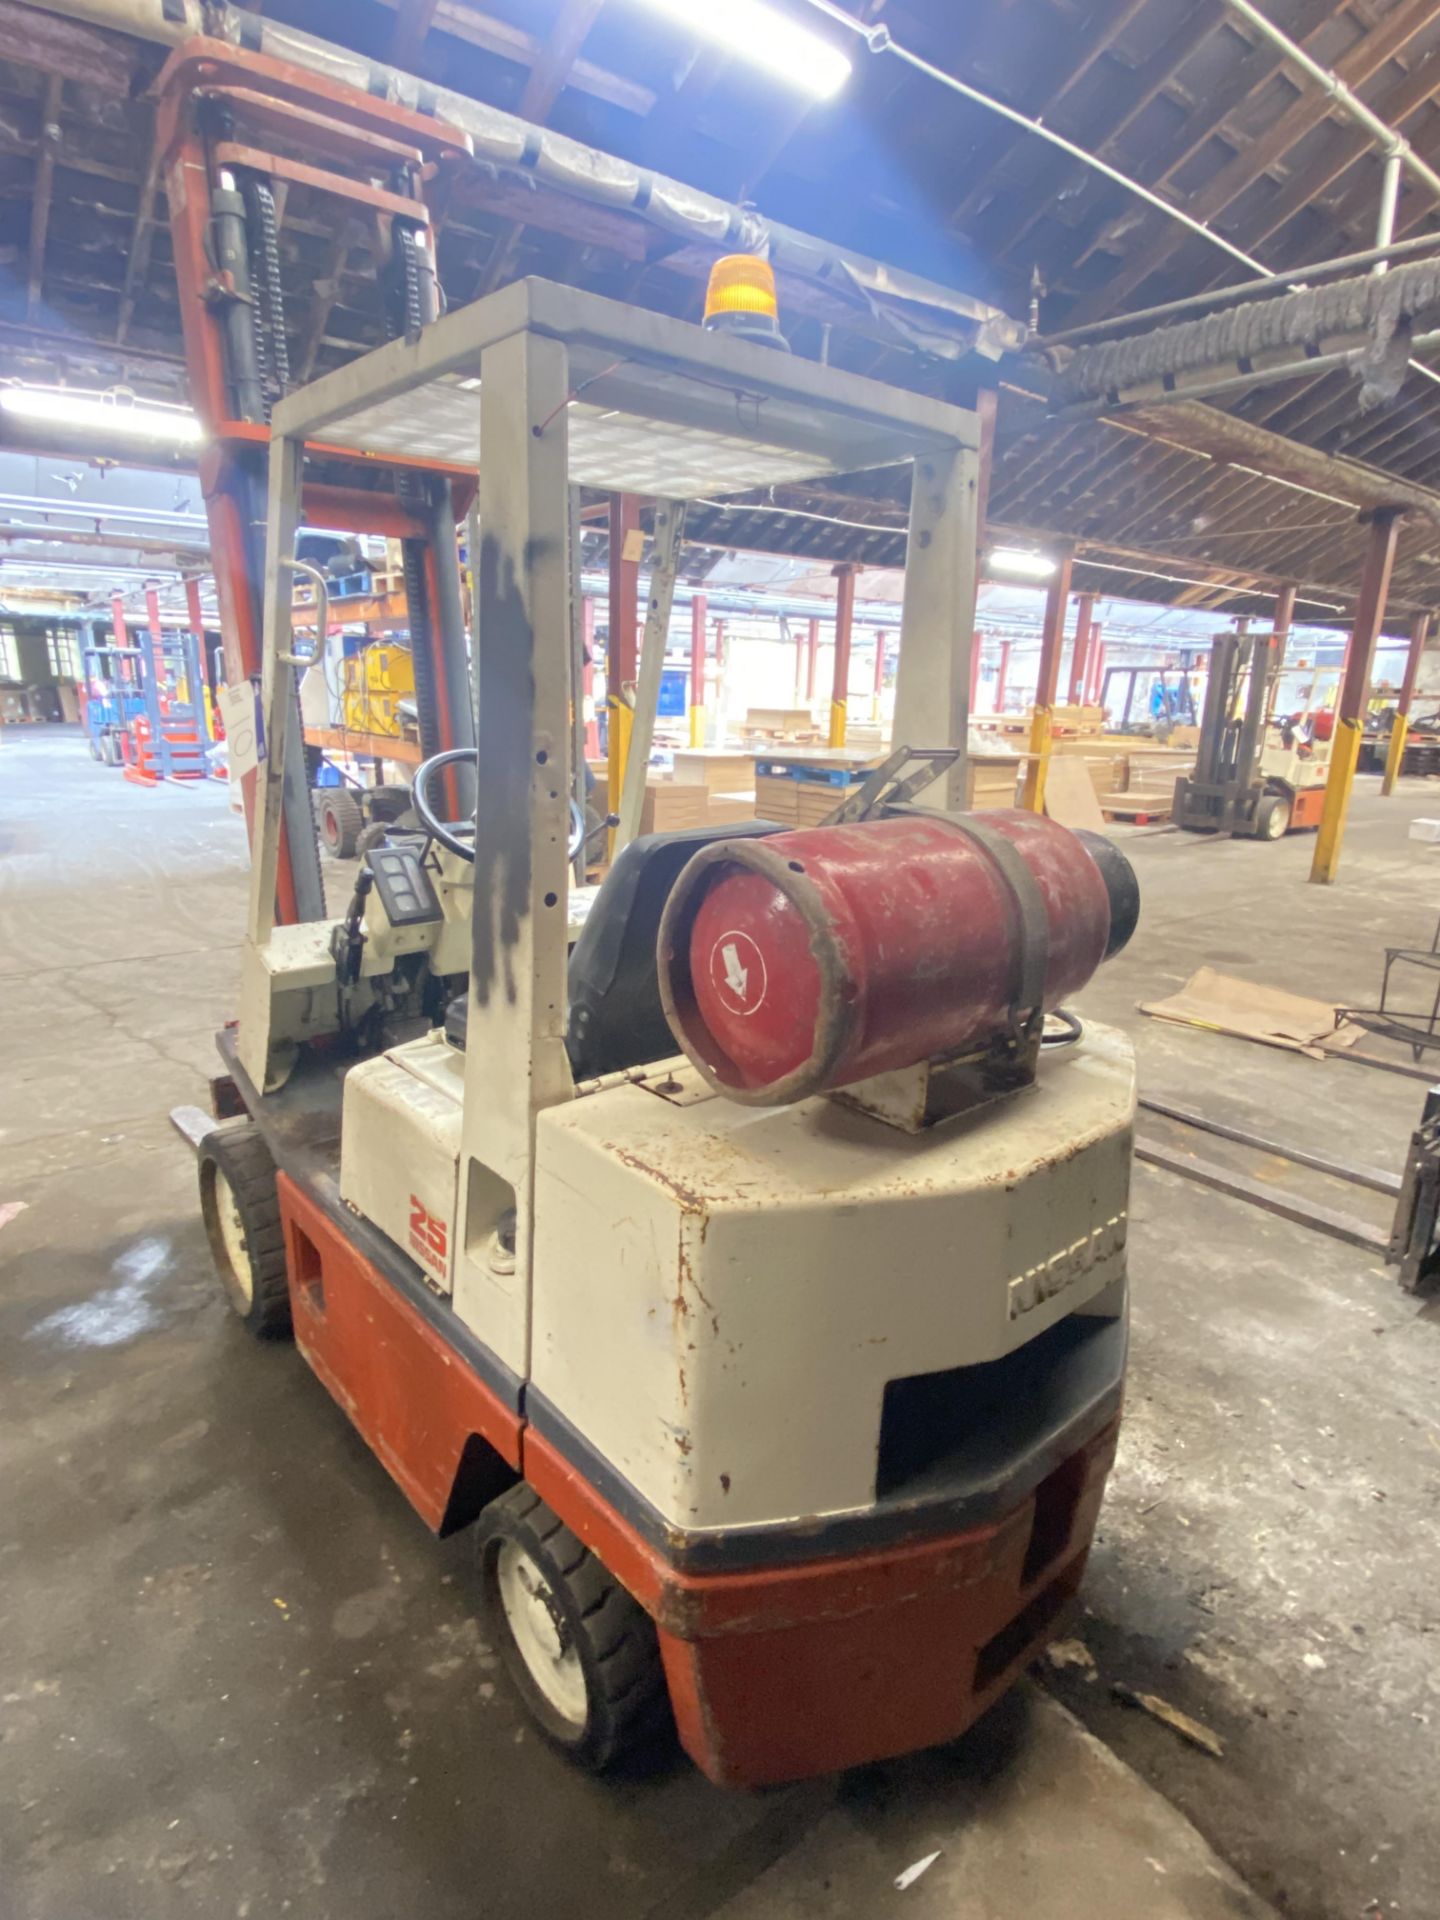 Nissan CPH02 2250kg cap. LPG Fork Lift Truck, serial no. 001274, indicated hours 7799.3 (at time - Image 5 of 10